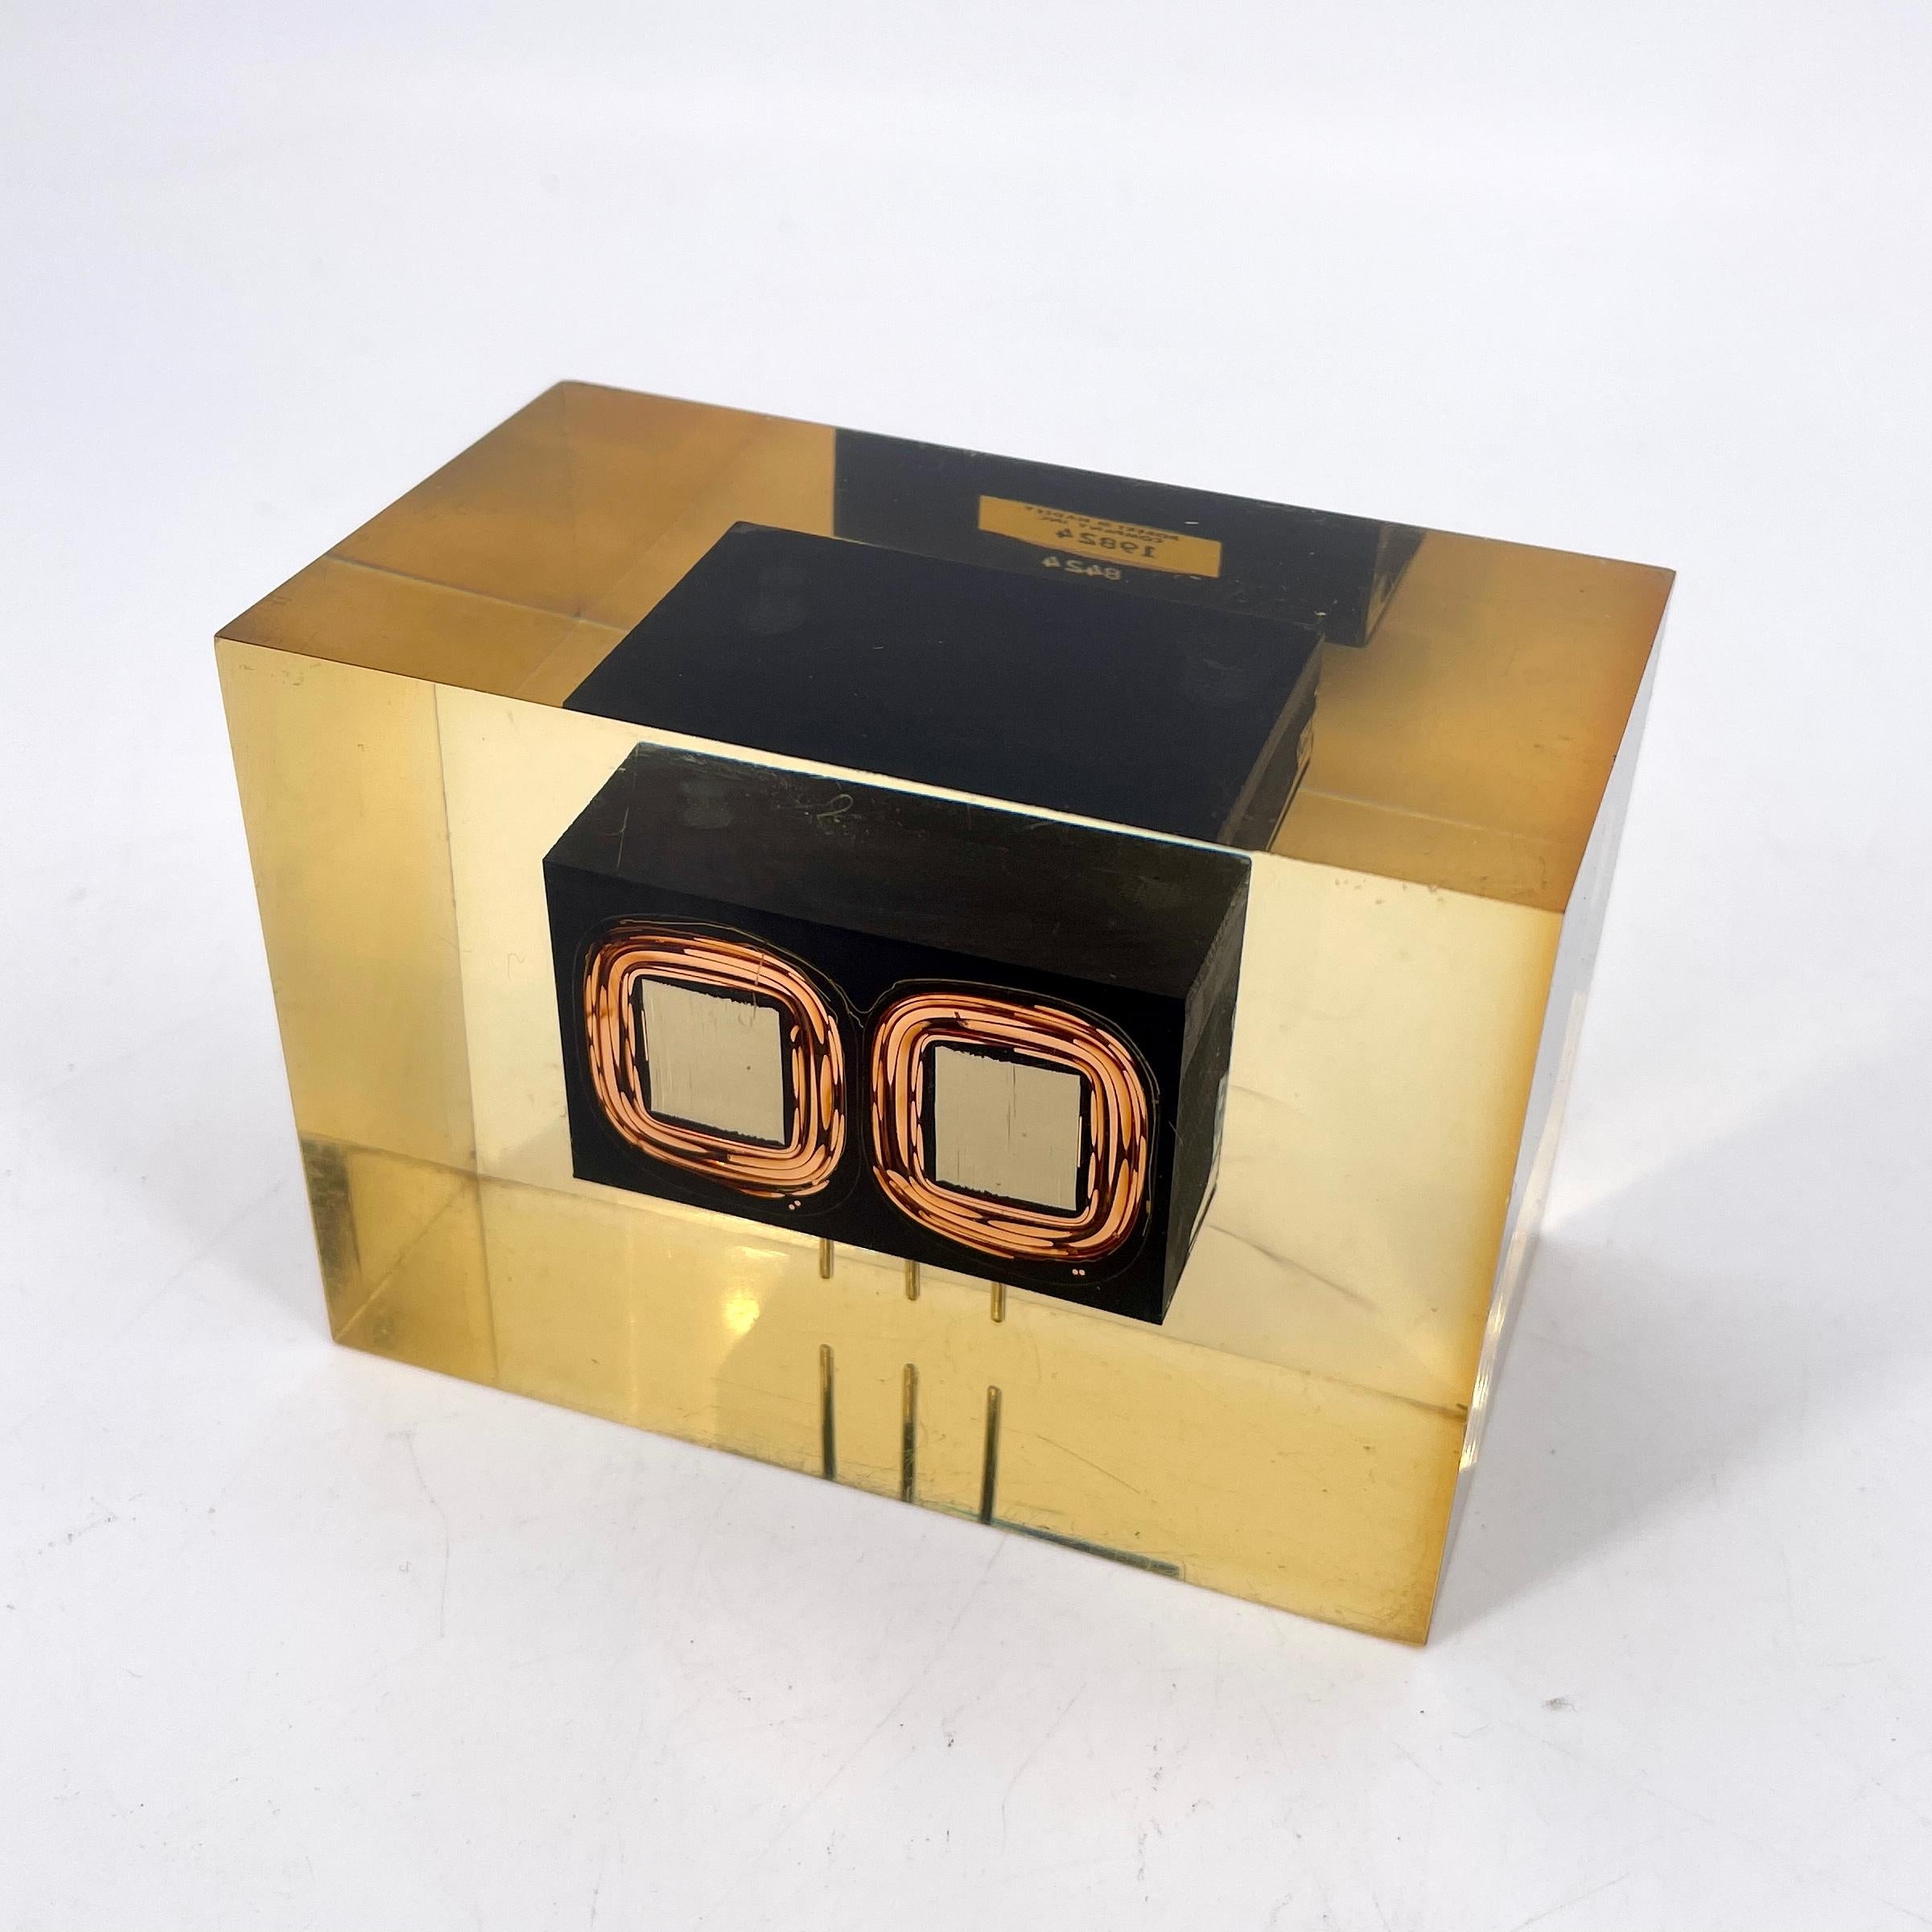 American 1960s Microchip Lucite Paperweight Vintage Retro Tech Sculpture MCM Anachronism For Sale